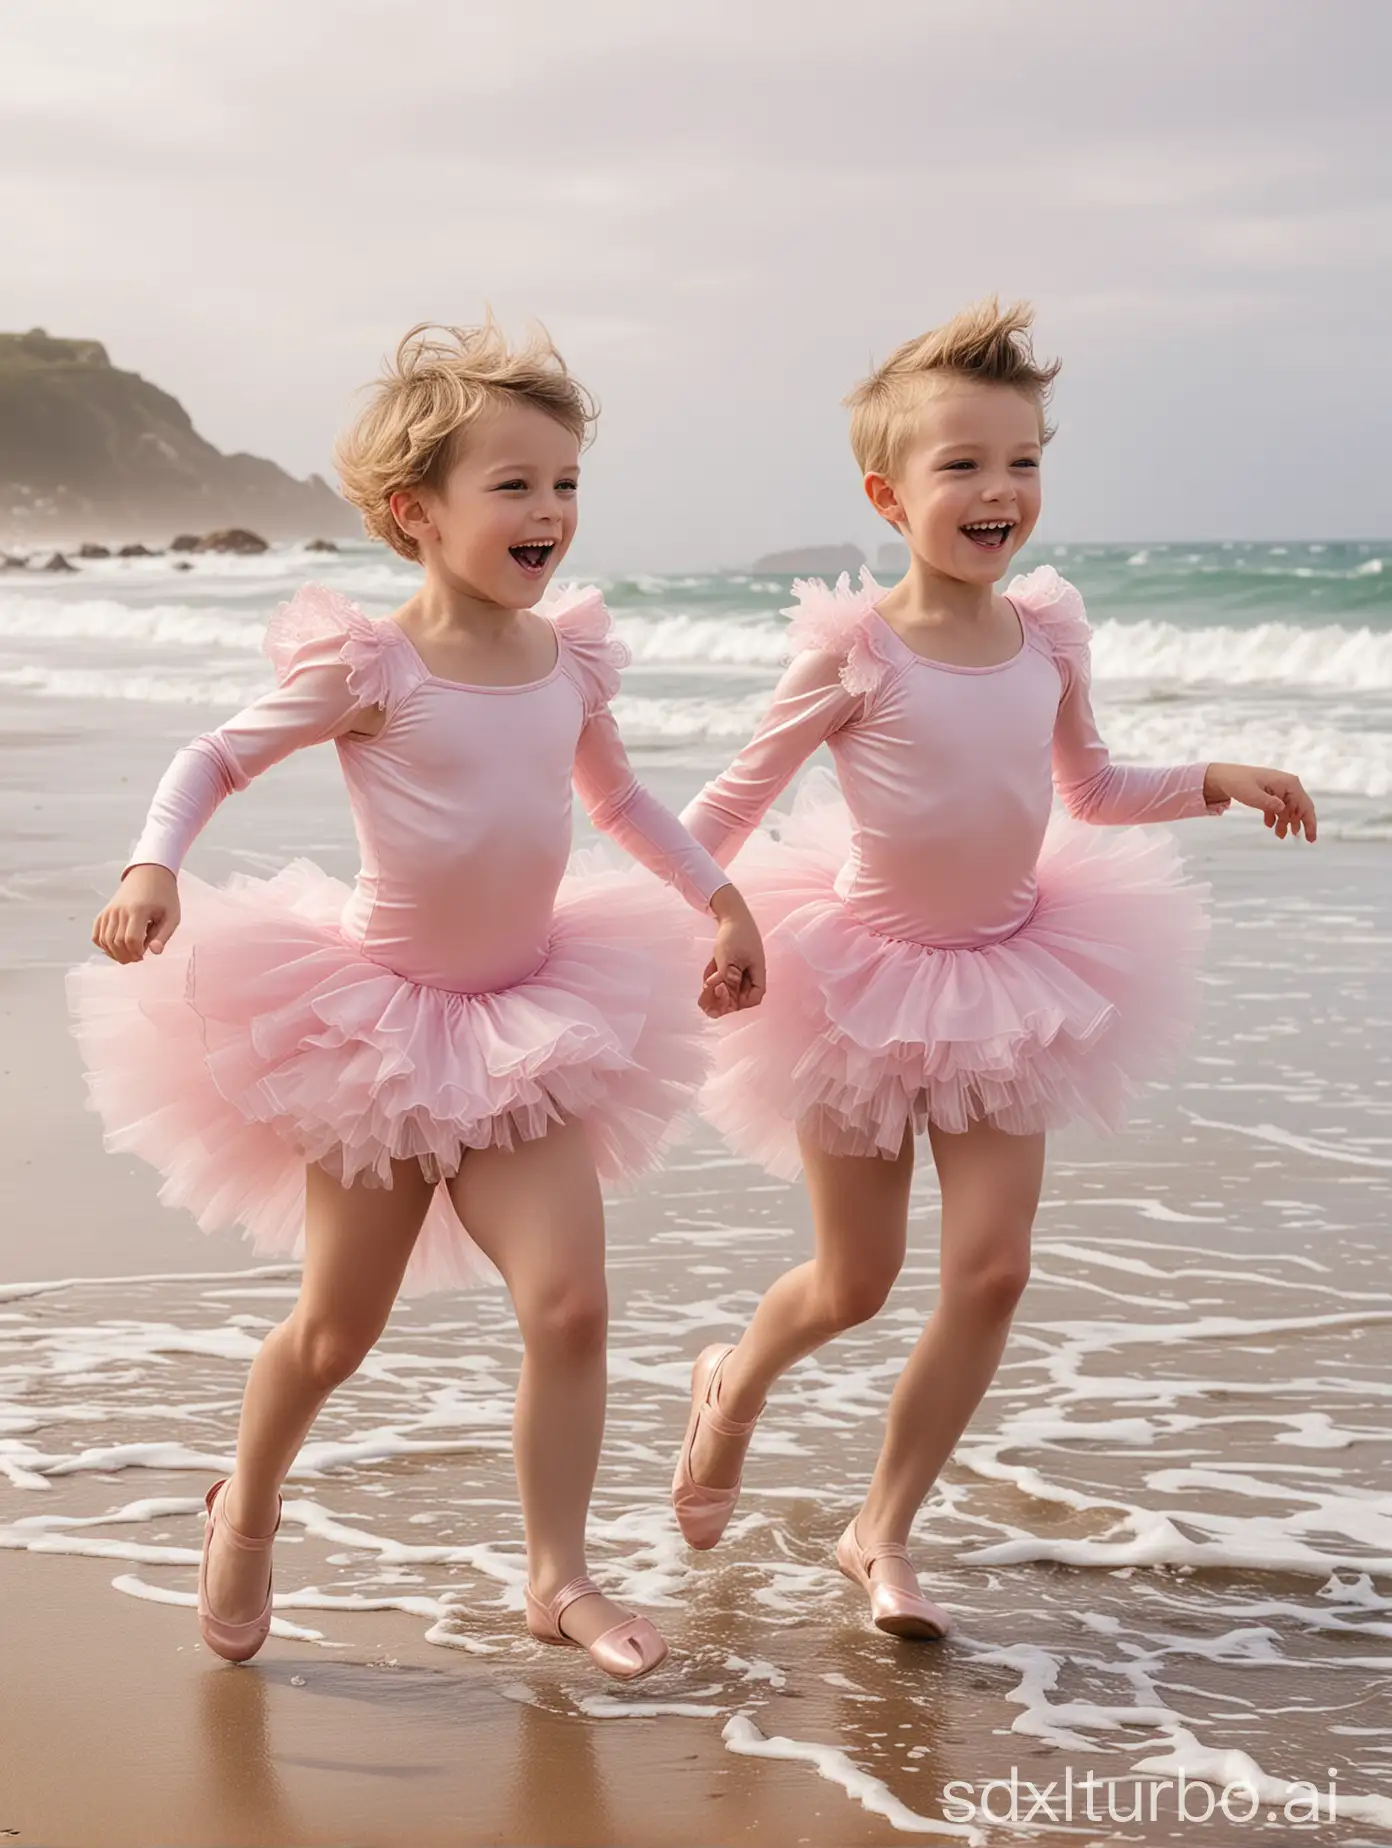 ((Gender role reversal))), photograph of two short-haired 8-year-old boys running excitedly along a beach shoreline in silky pink ballerina leotards with long frilly sleeves and frilly tutus, short smart hair in a quiff shaved on the sides, energetic